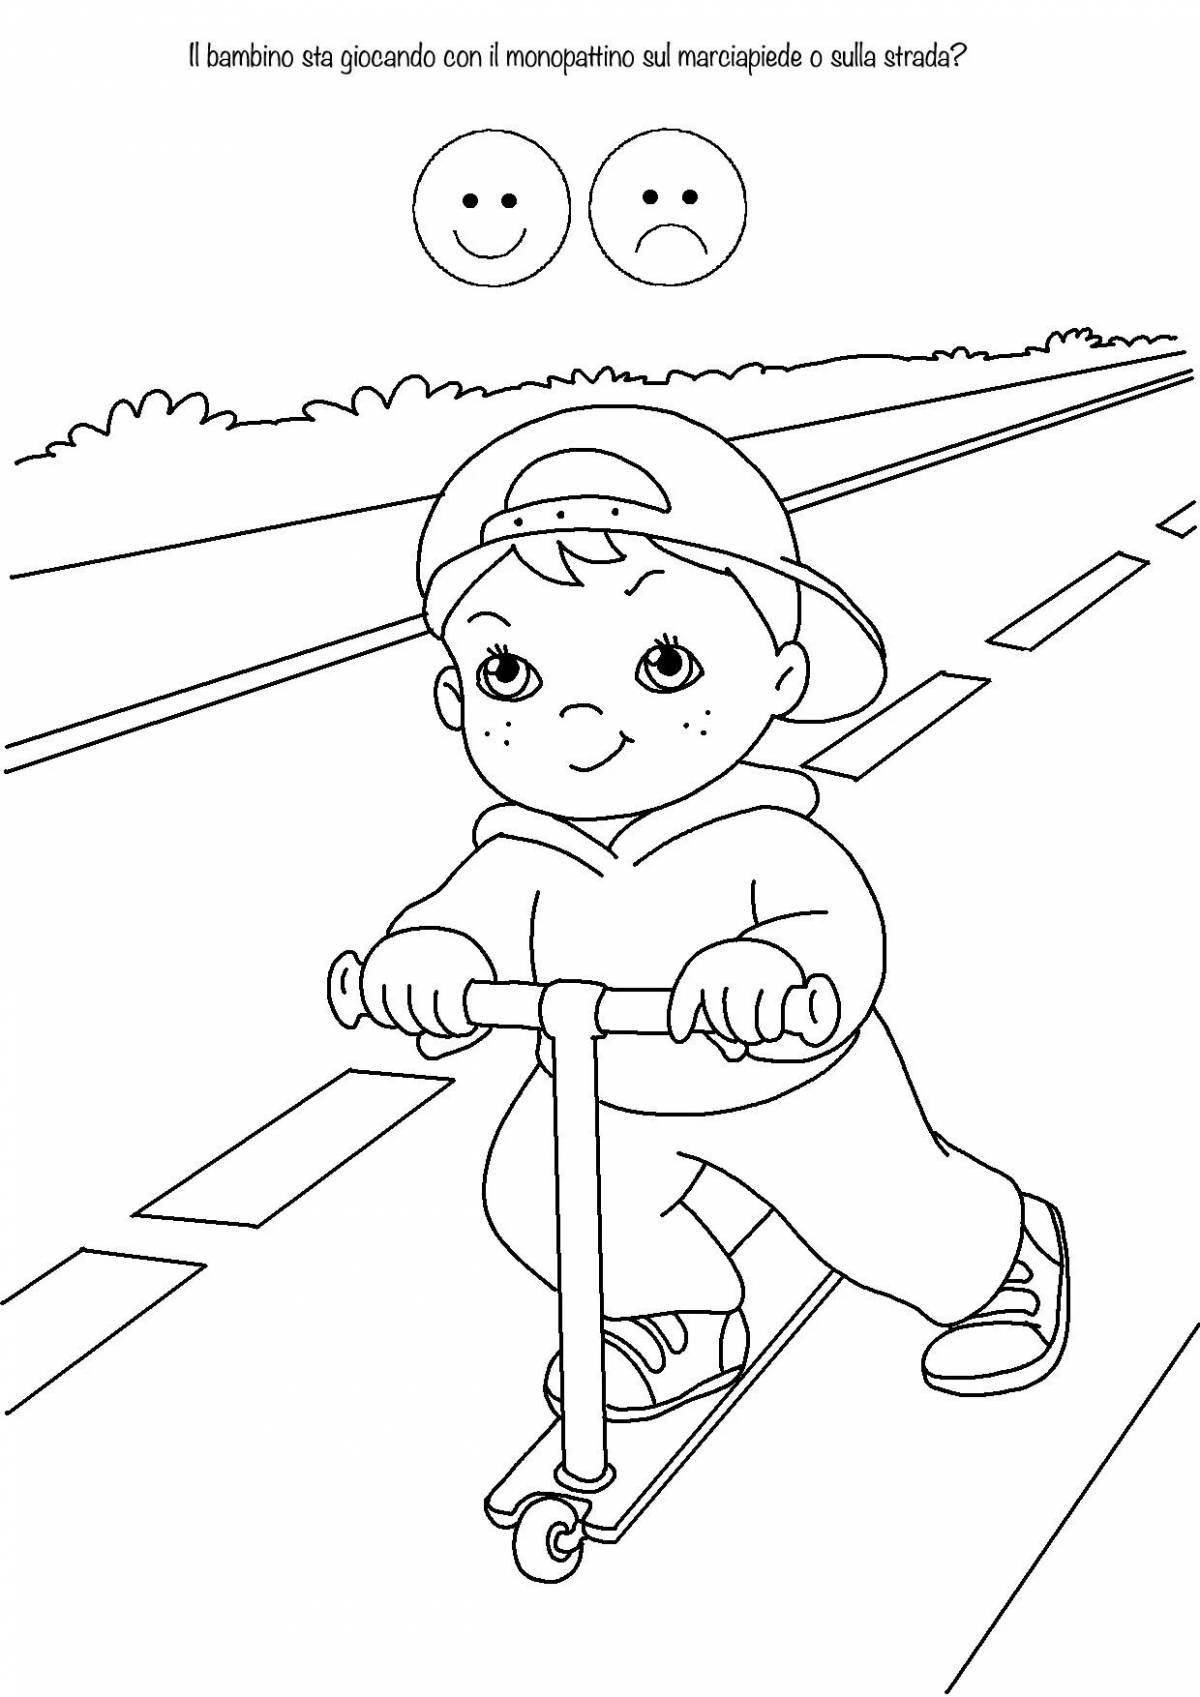 Creative crosswalk coloring book for 6-7 year olds